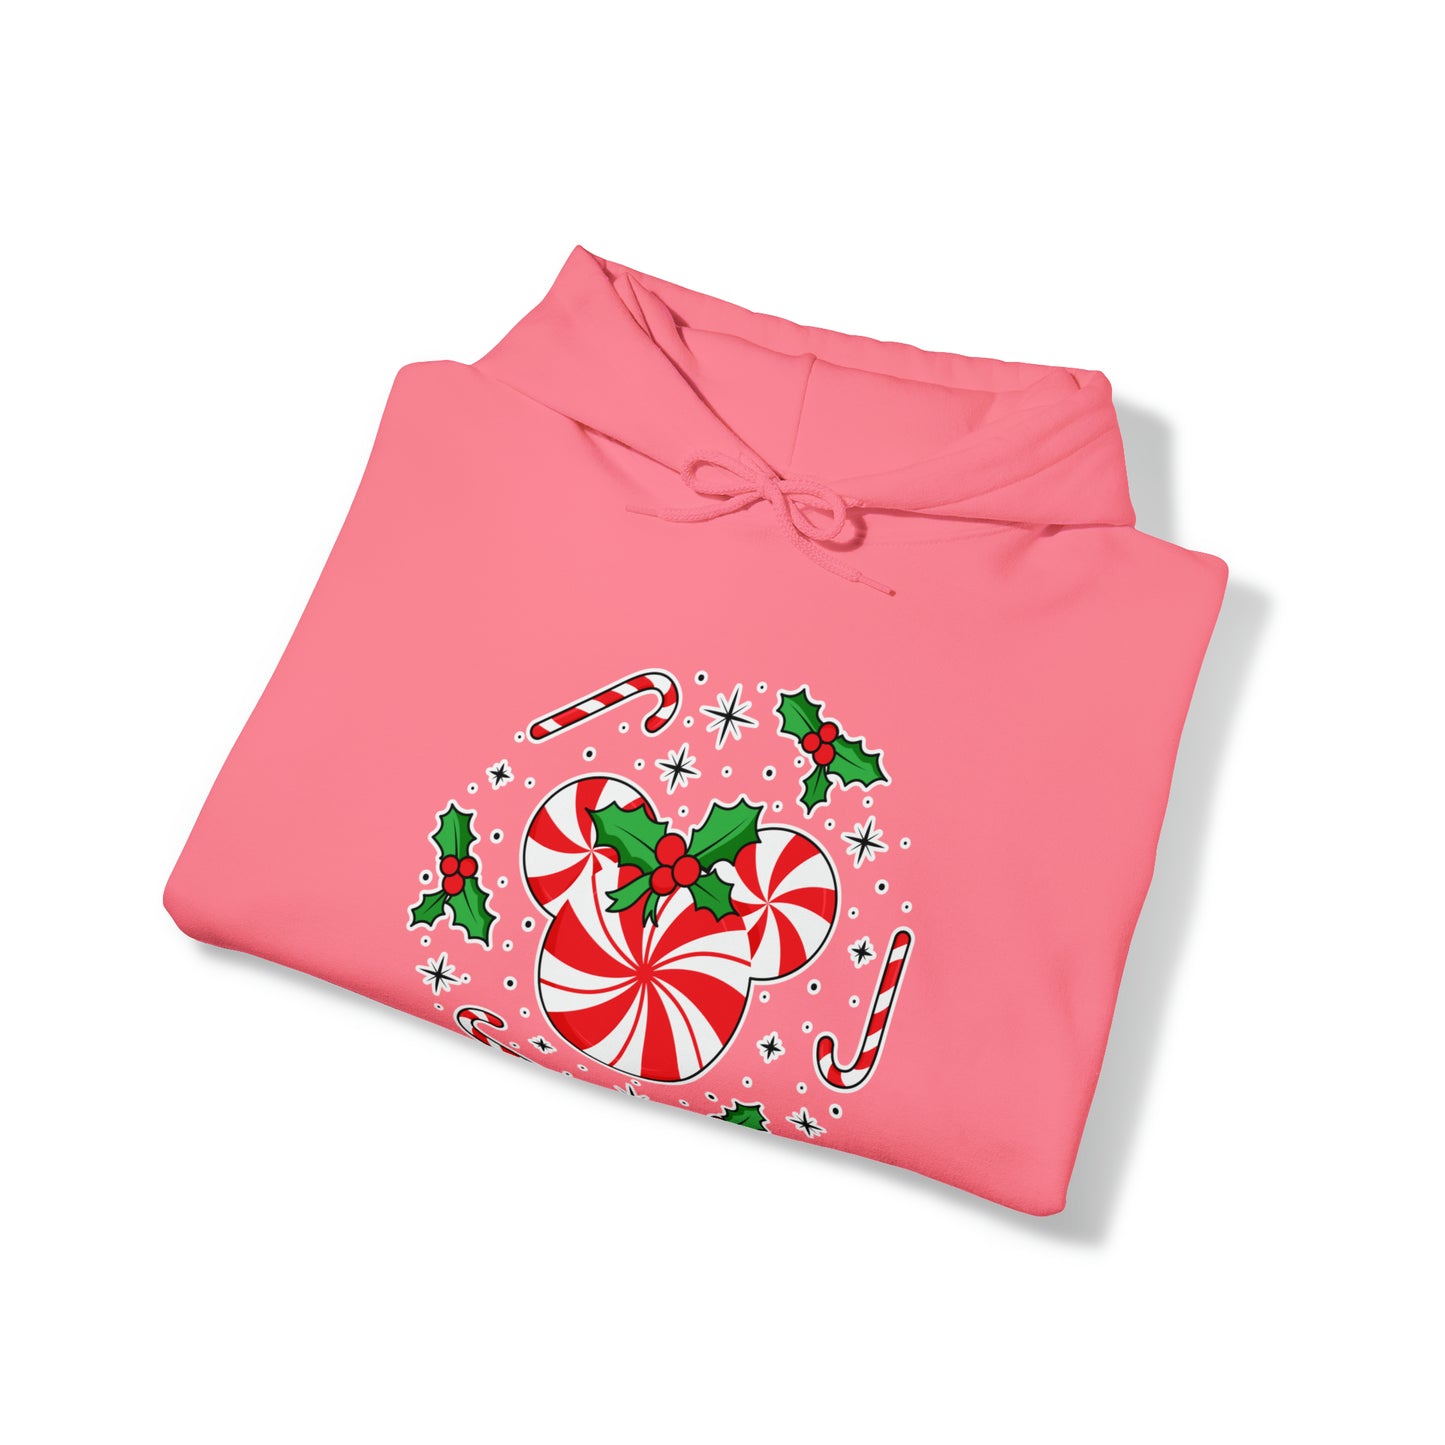 Peppermint Candy Bow Unisex Hooded Sweatshirt